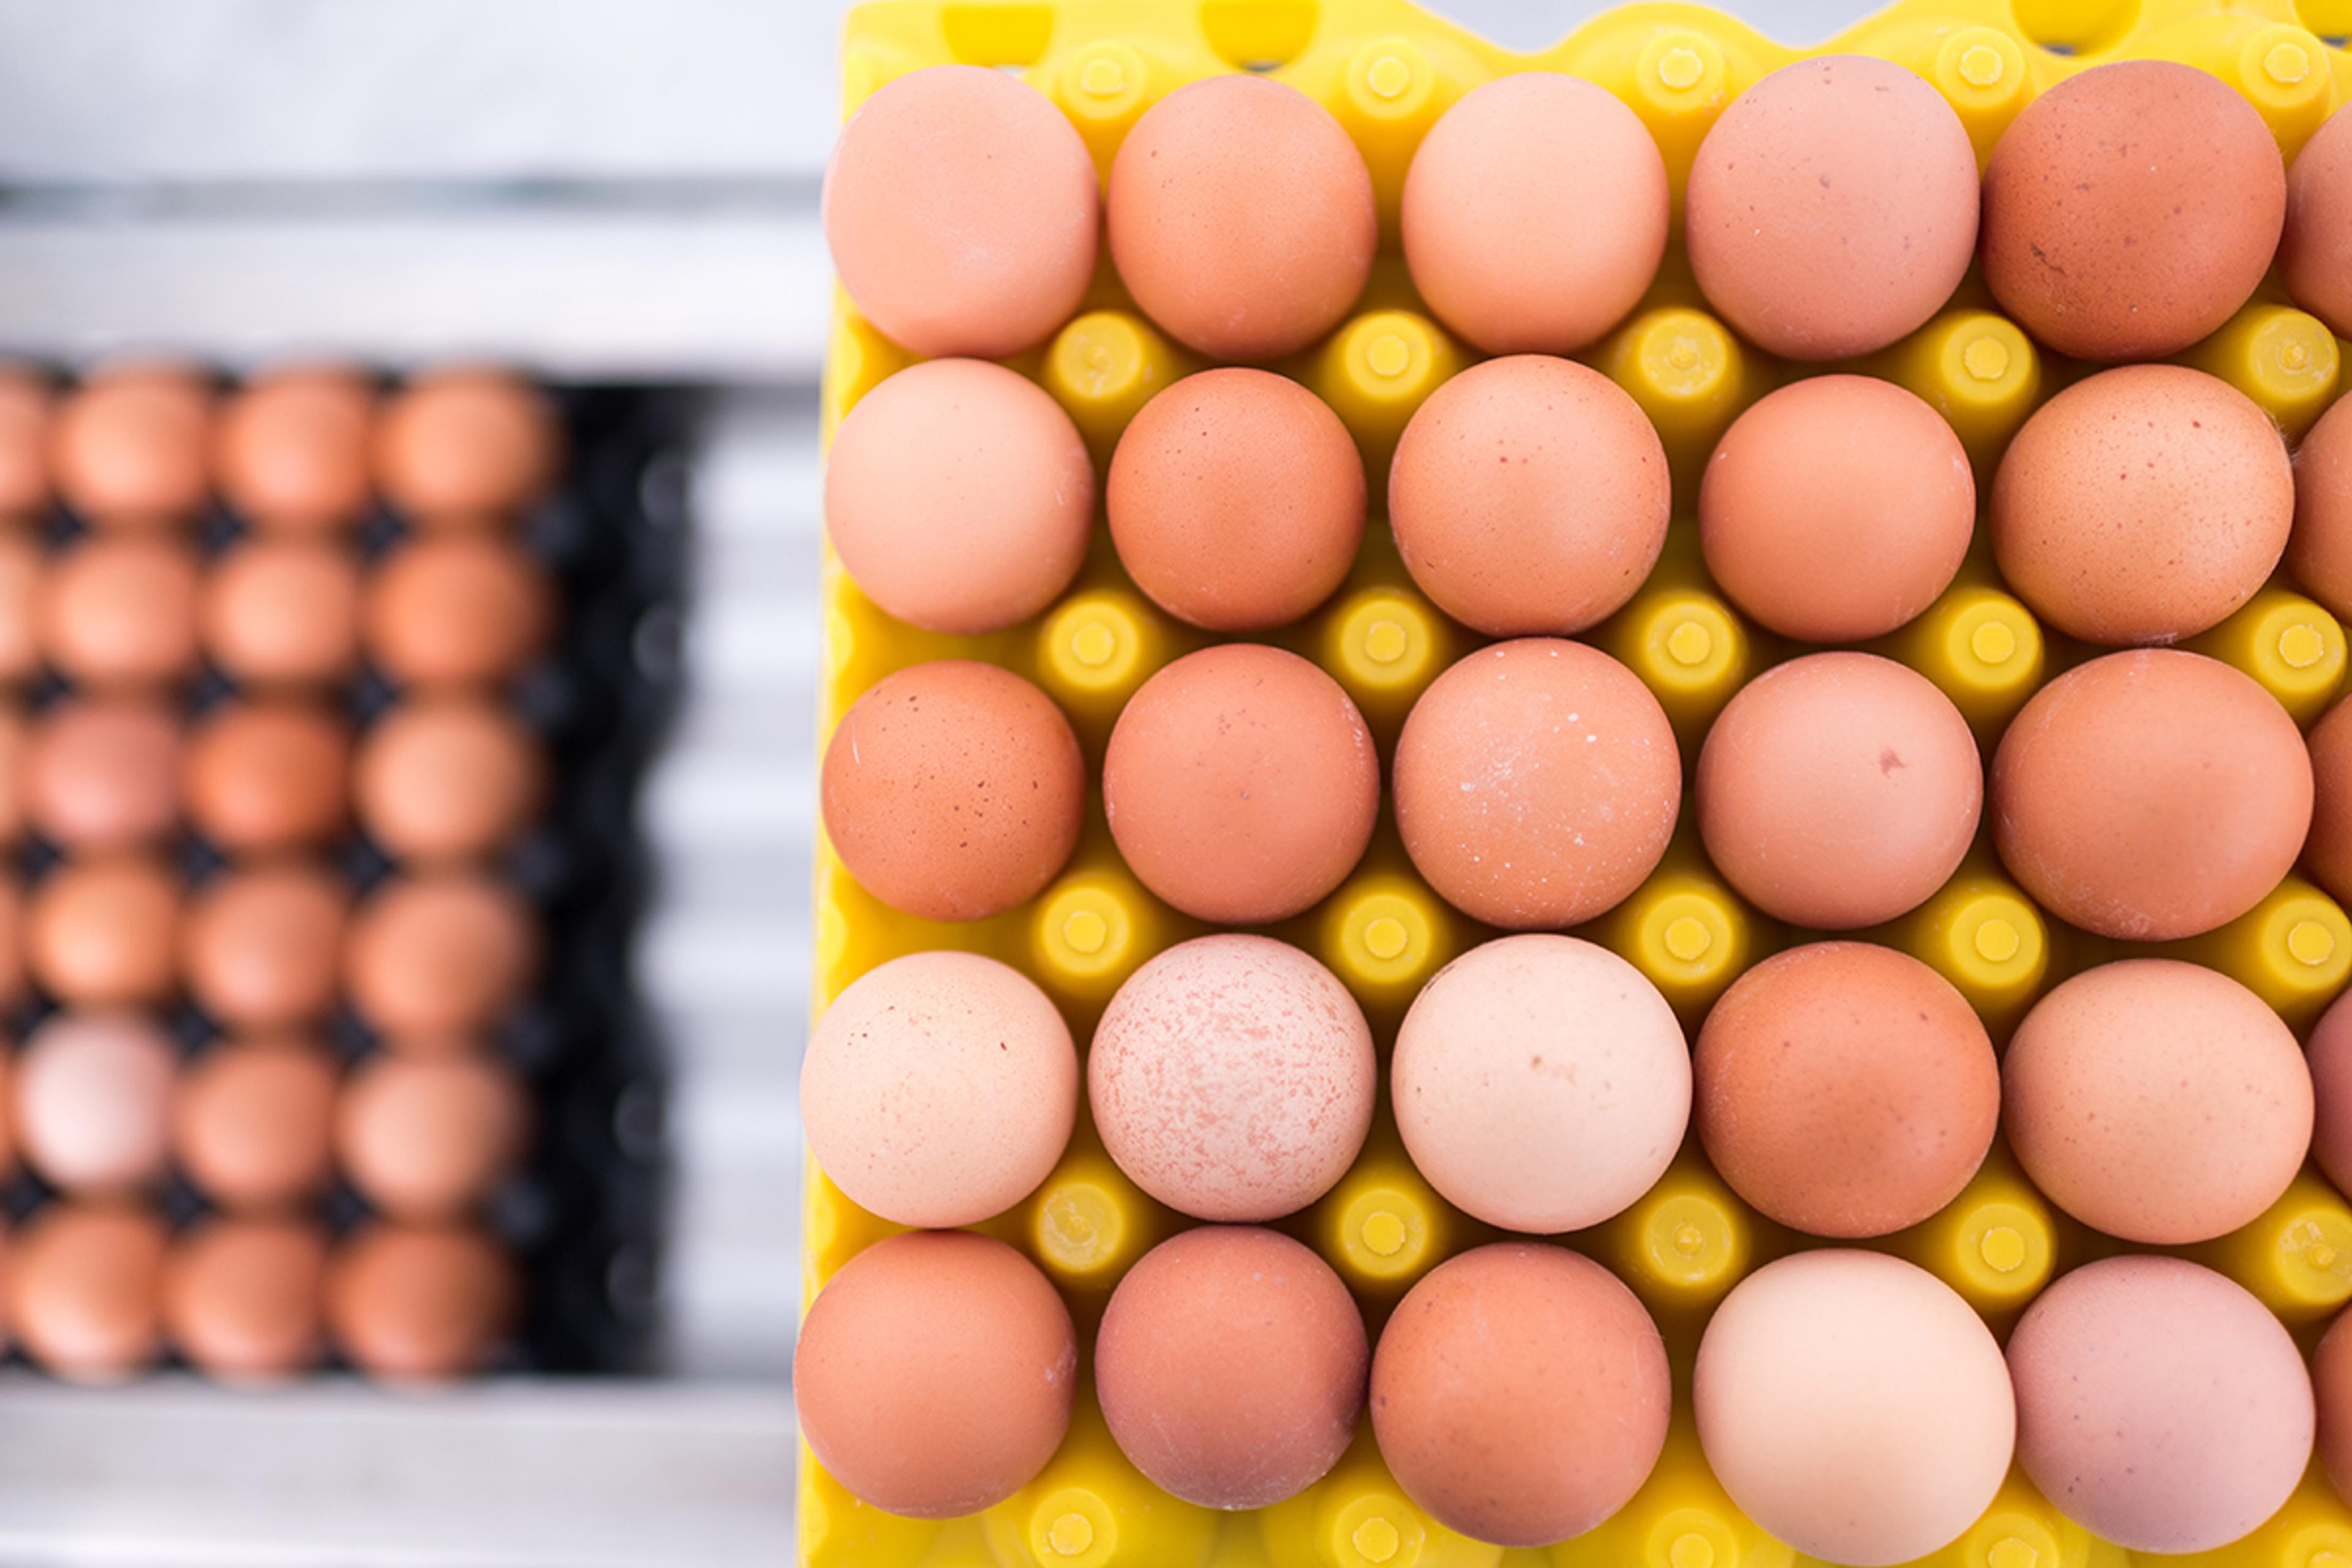 Rootstock, What Do Cage-Free, Free-Range and Pasture-Raised Eggs Mean?